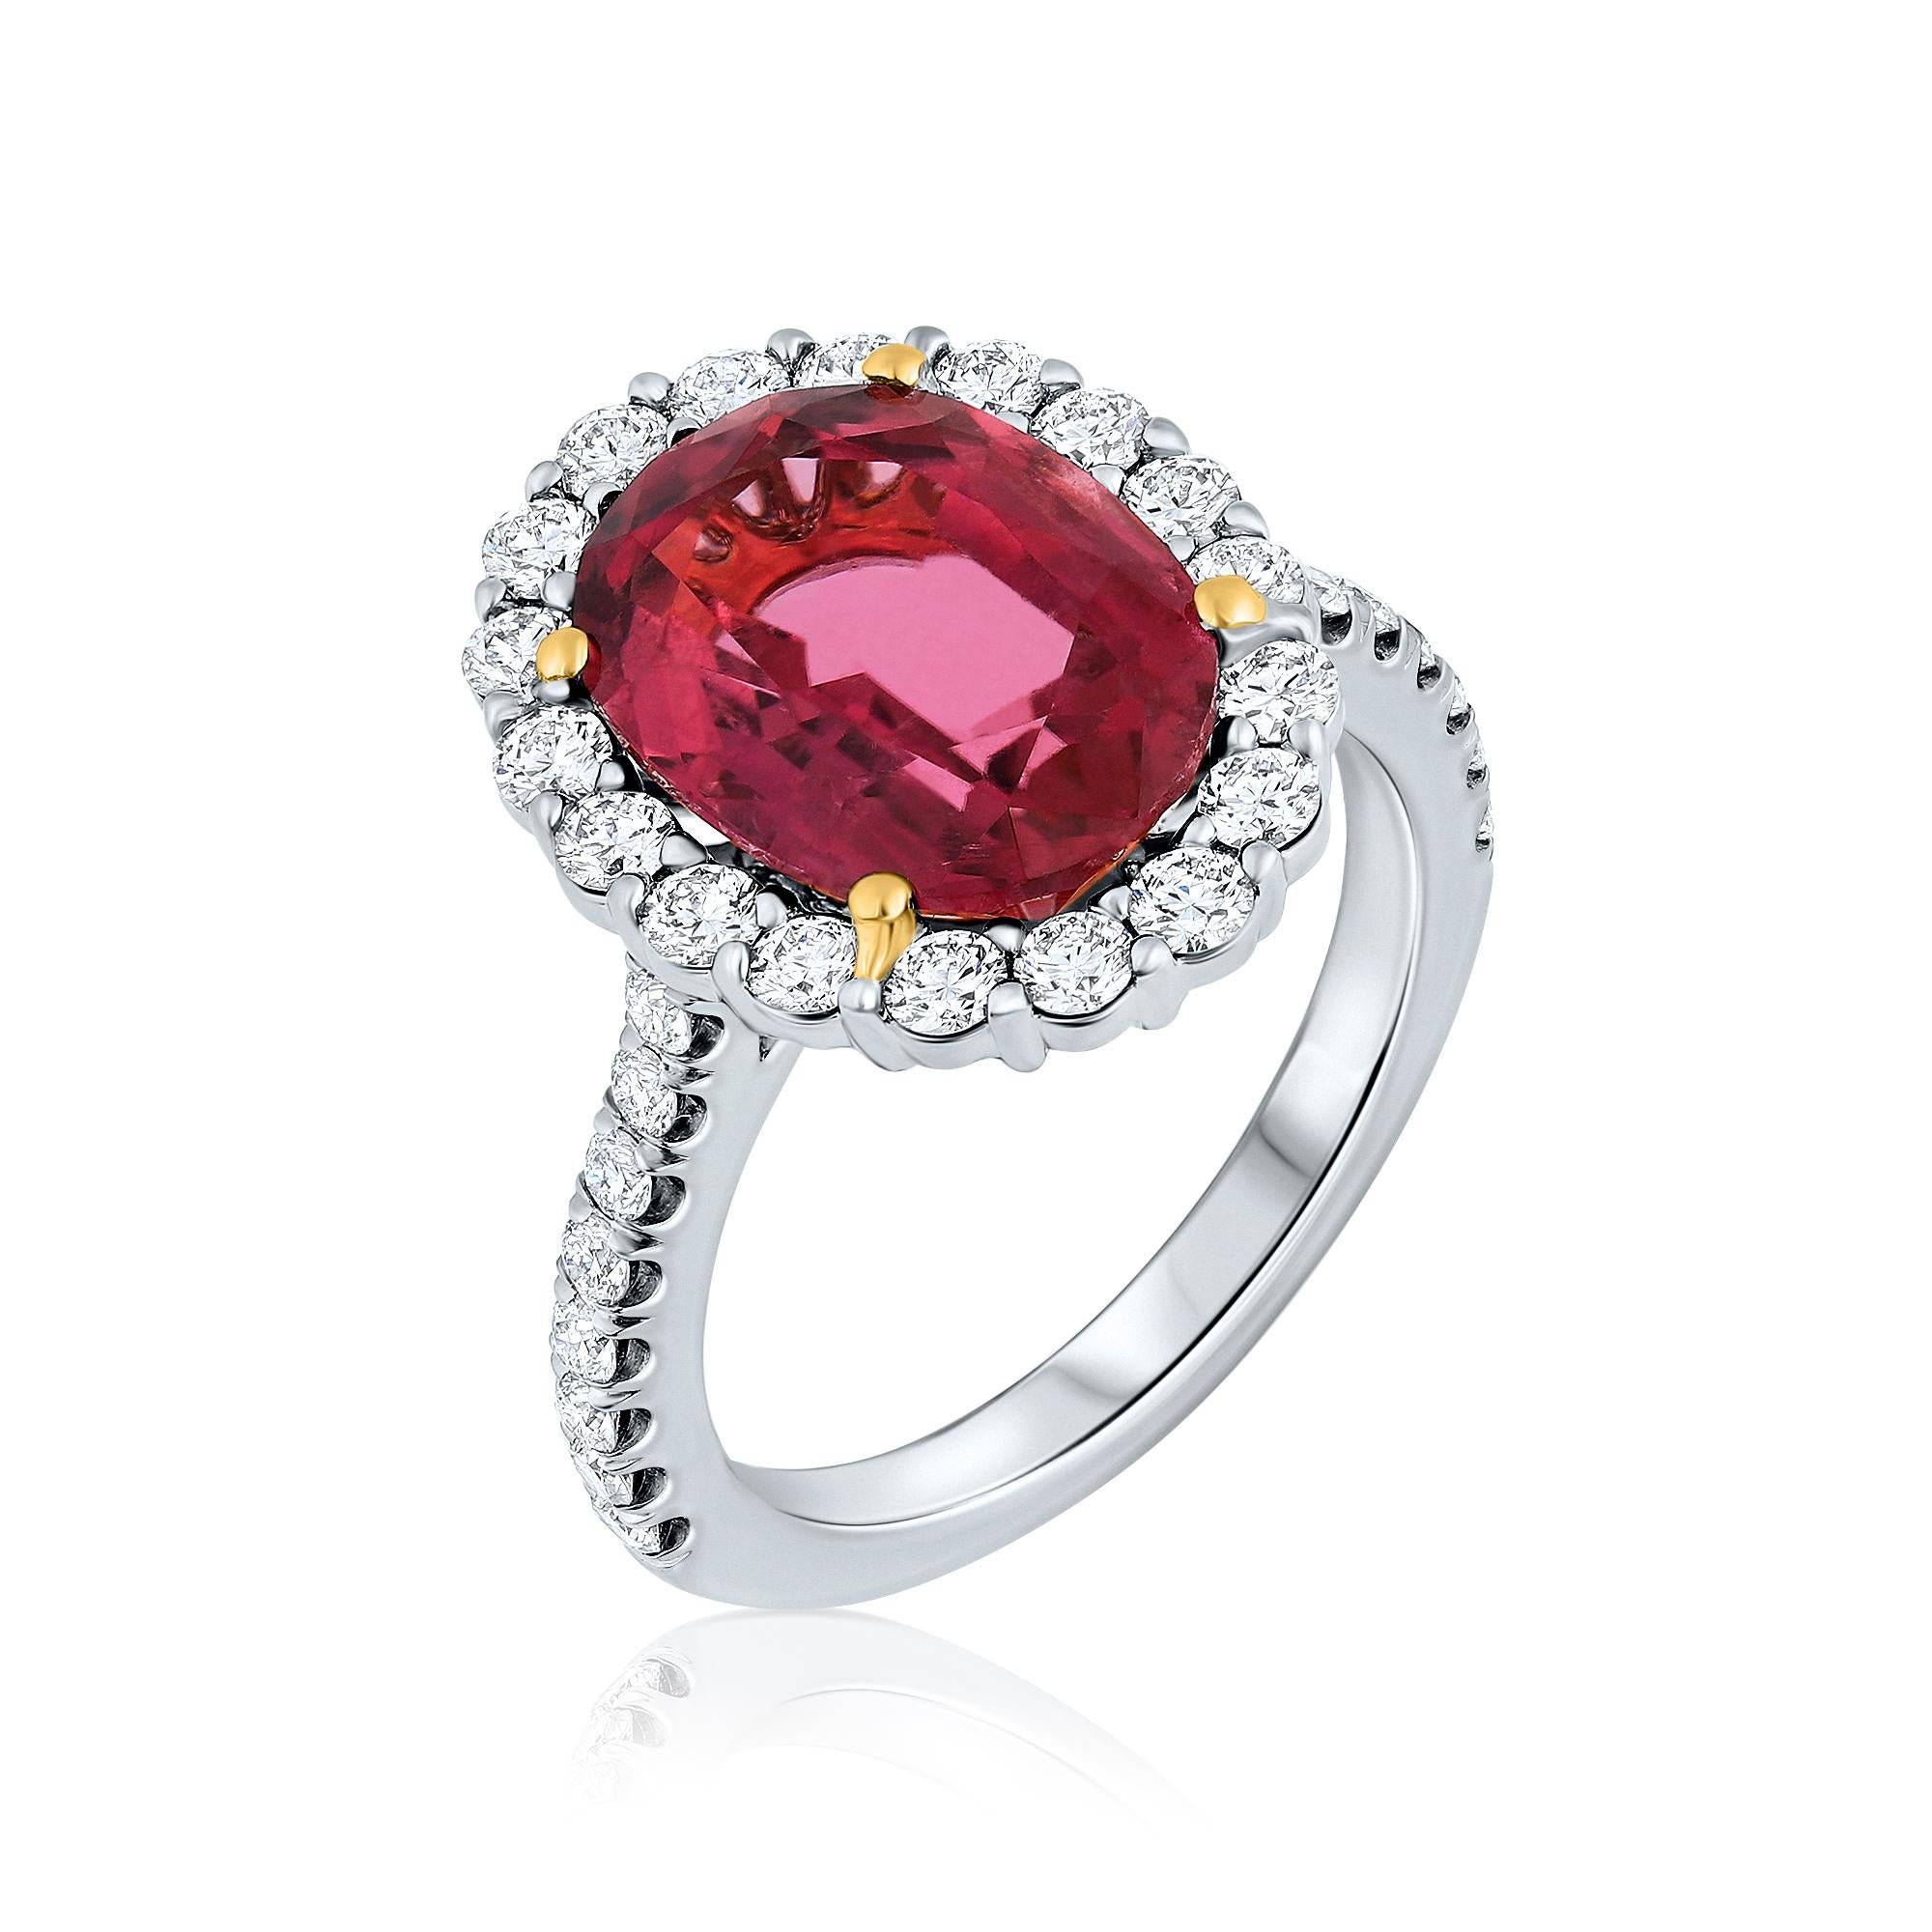 A stunning cocktail ring featuring a 4.93-carat oval-shaped Red Tourmaline (Rubellite) as its breathtaking centerpiece. Surrounding the vibrant center stone are sparkling round brilliant Diamonds, creating a halo effect that enhances its beauty.